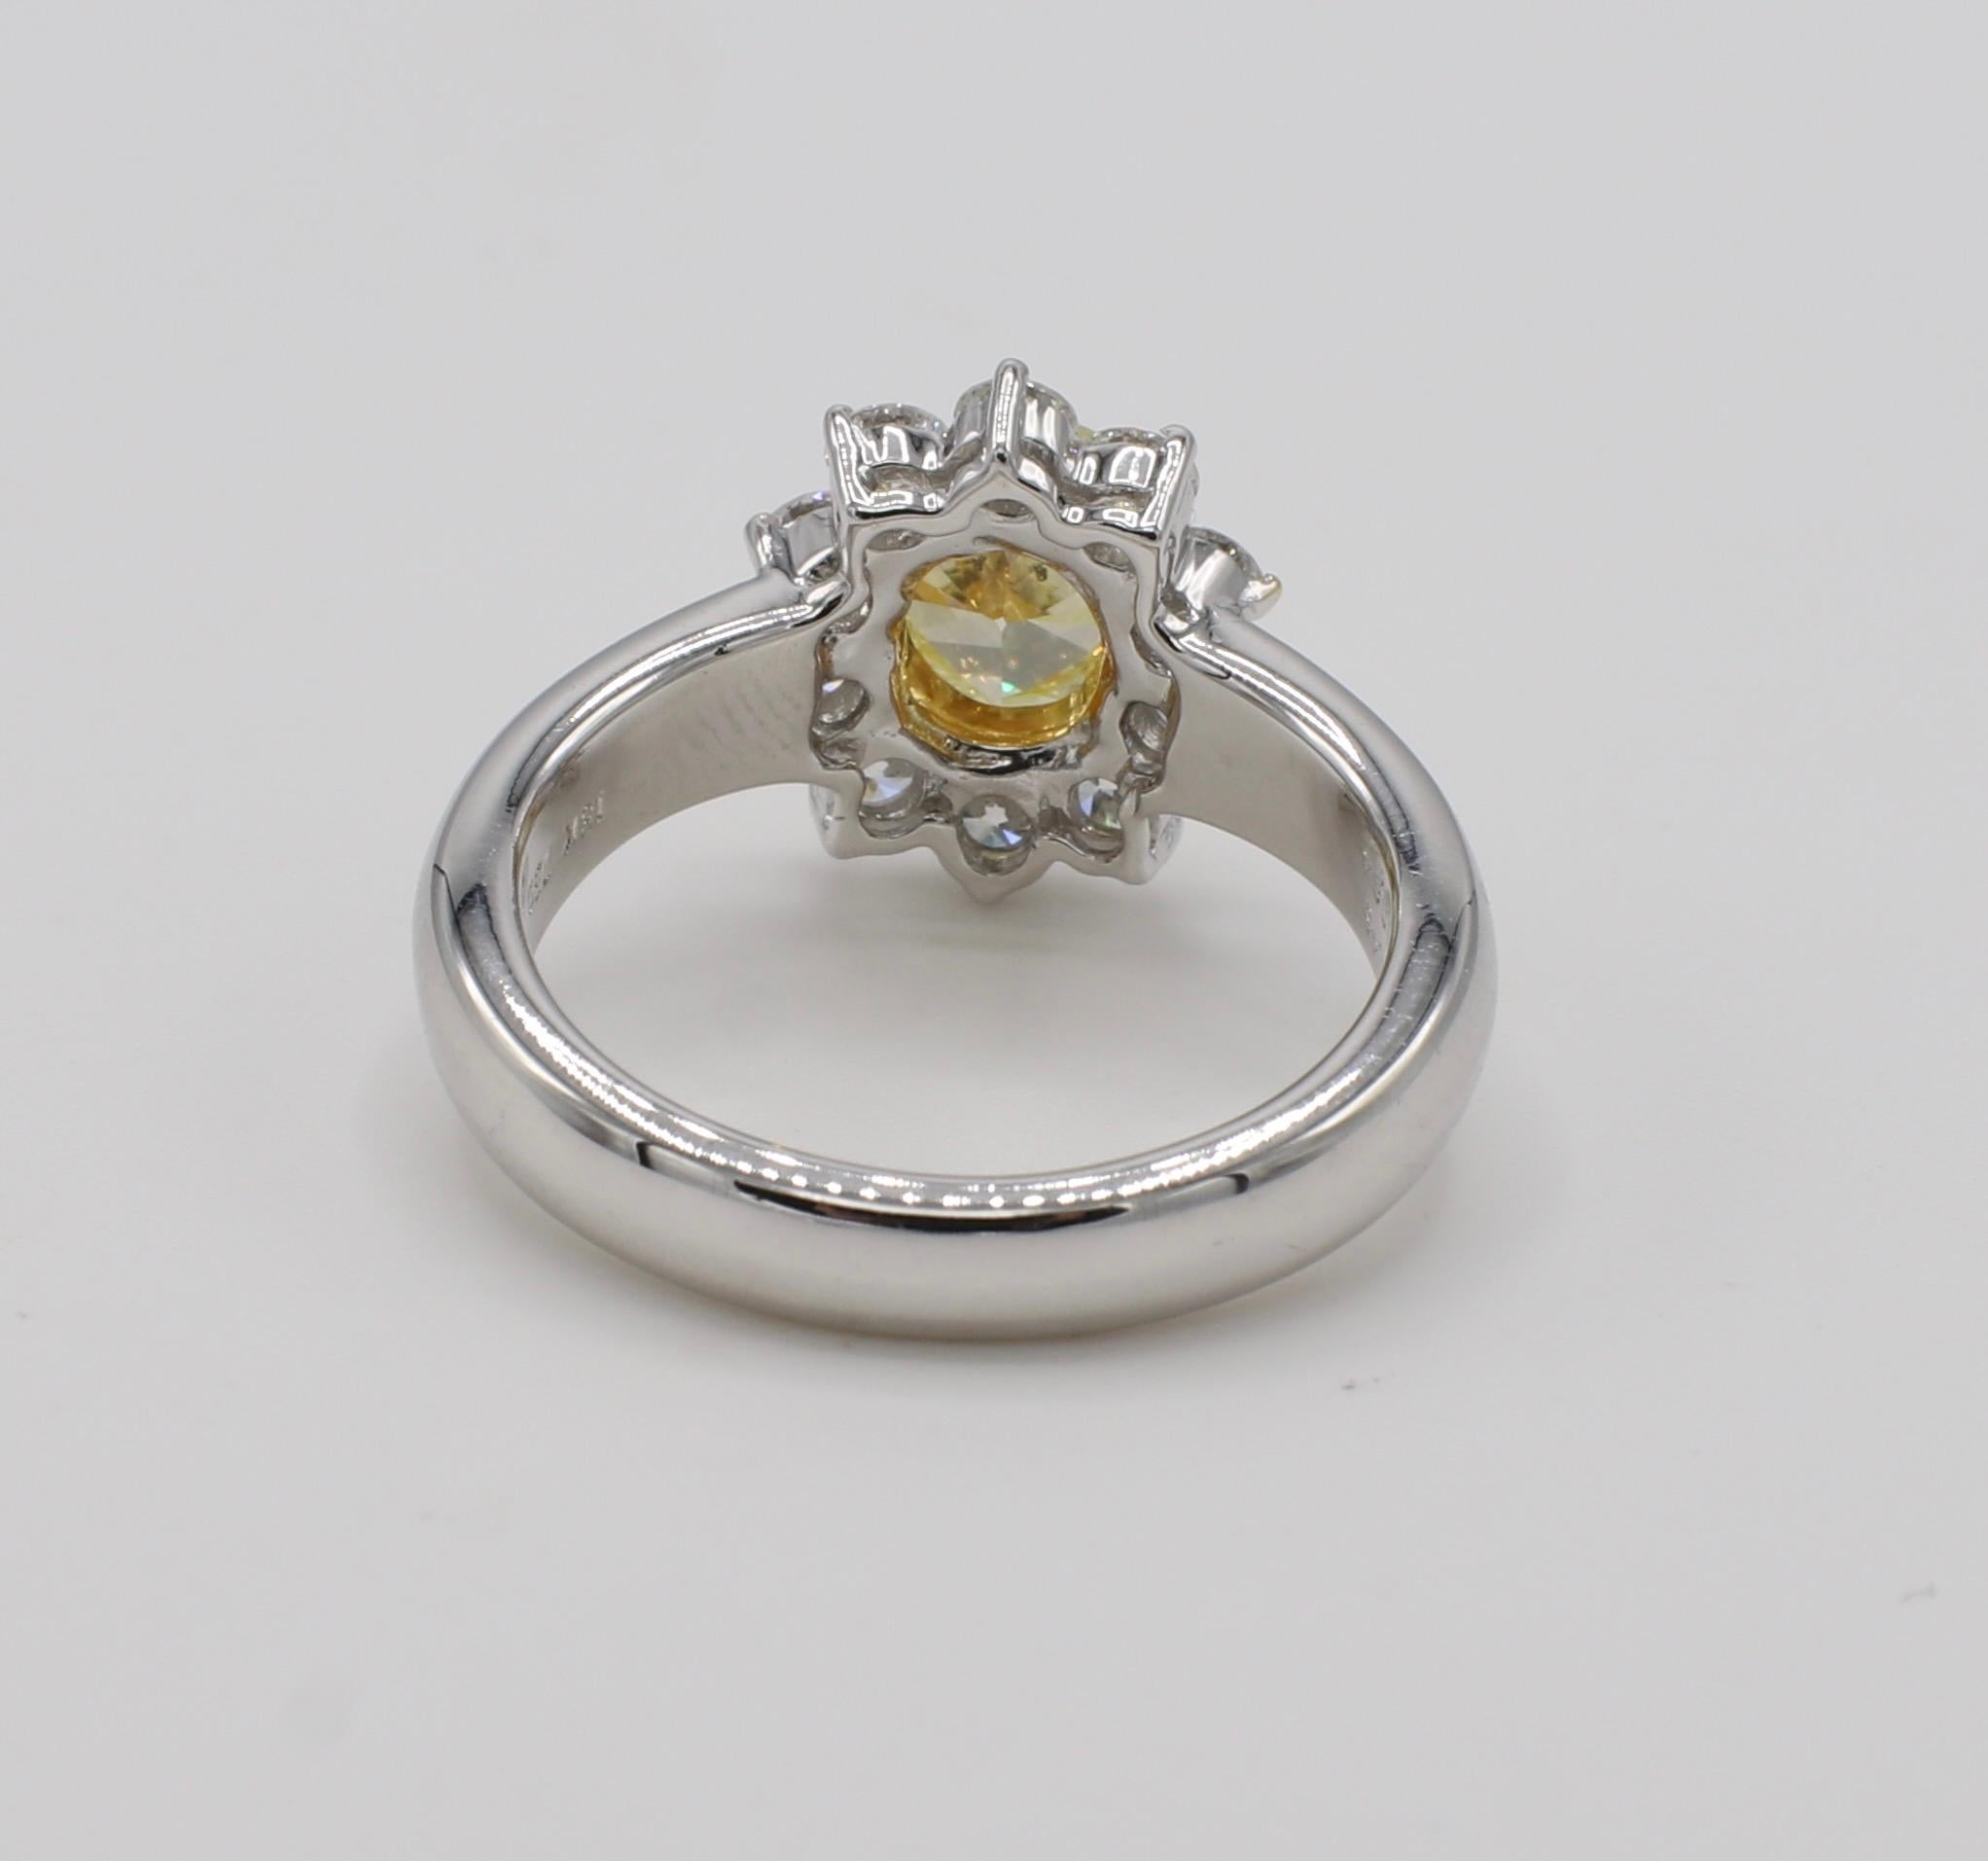 Oval Cut GIA Certified 1.04 Carat Natural Fancy Intense Yellow Oval Diamond Ring